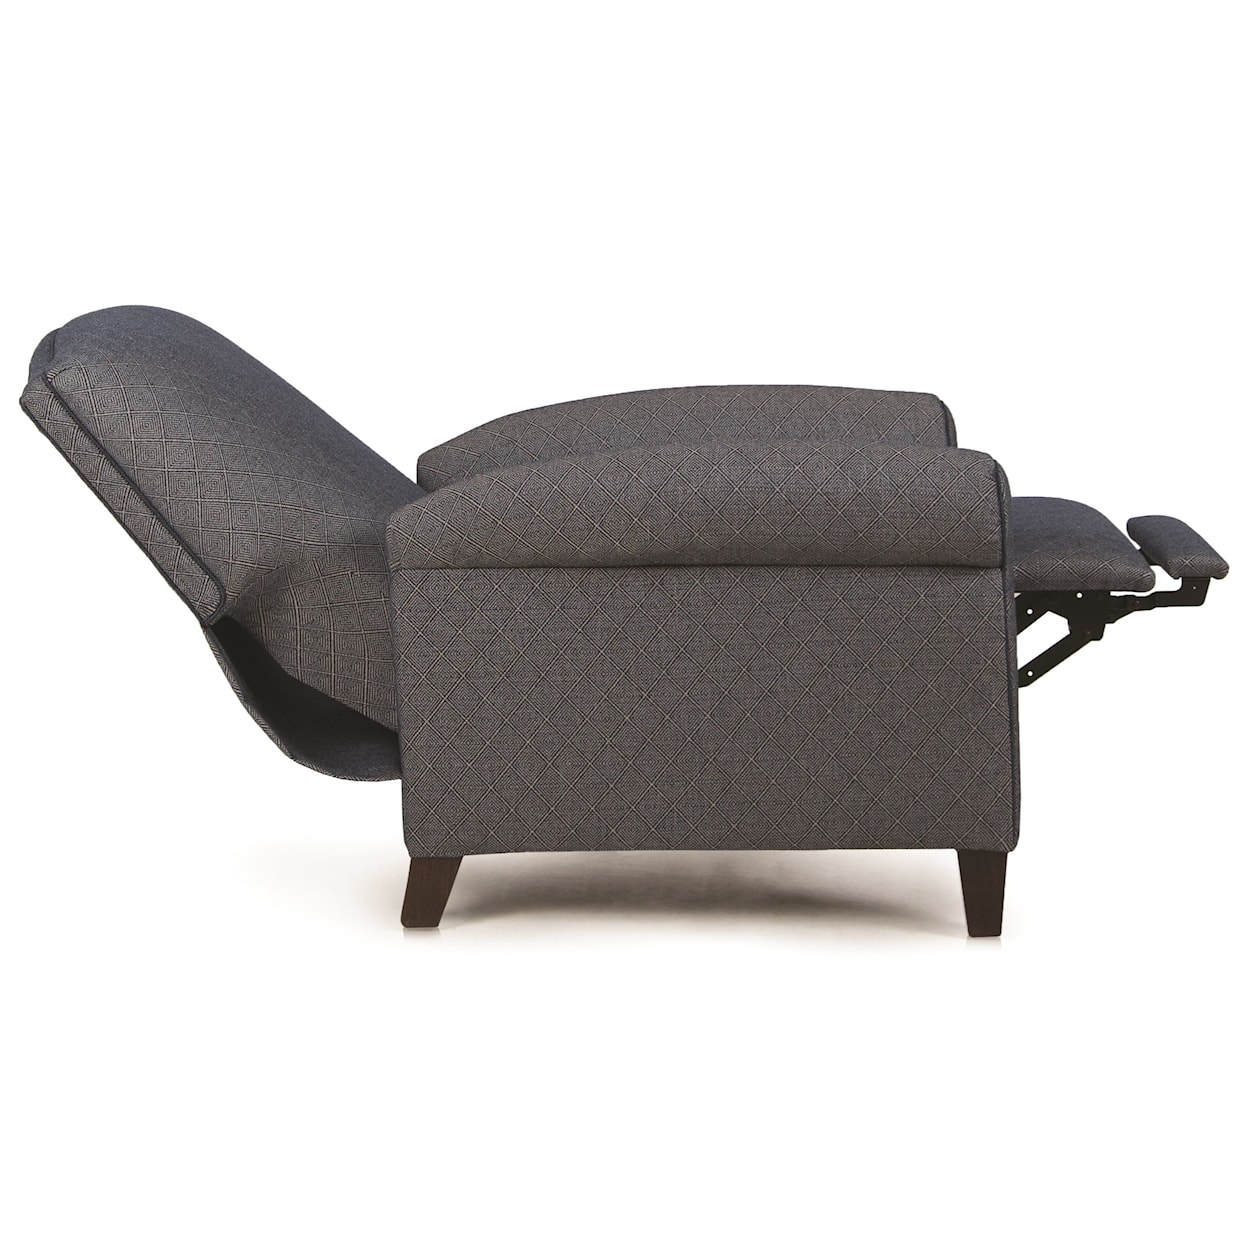 Smith Brothers 713 Motorized Reclining Chair